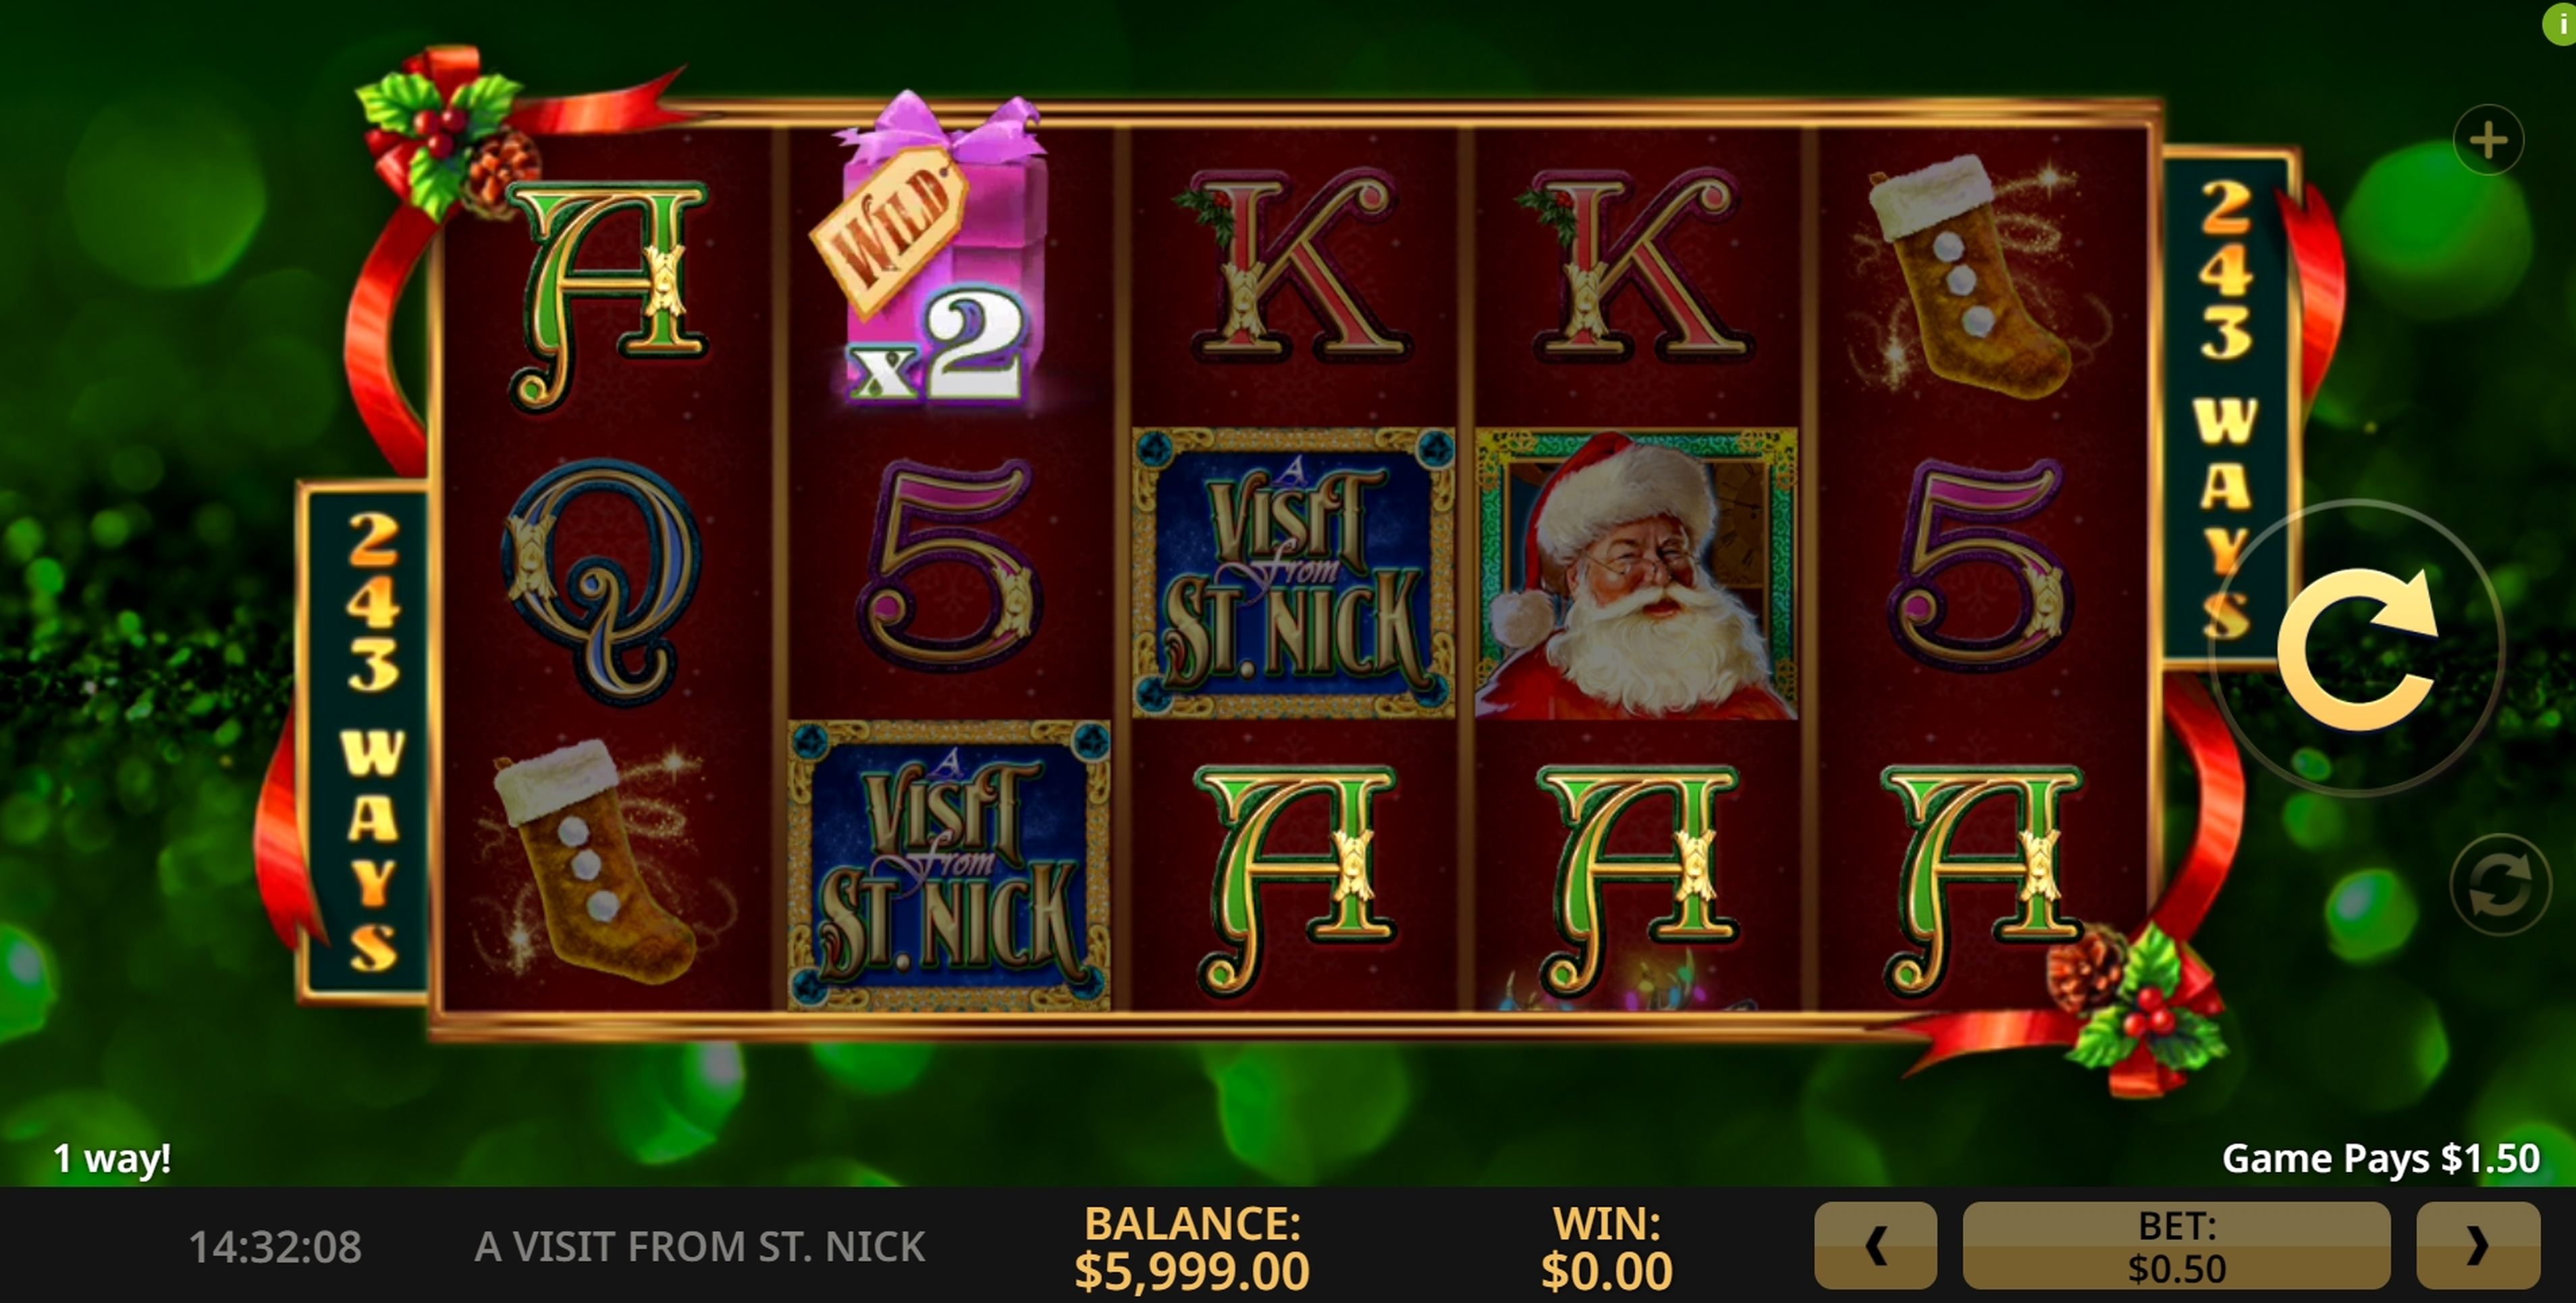 Win Money in A Visit from St. Nick Free Slot Game by High 5 Games